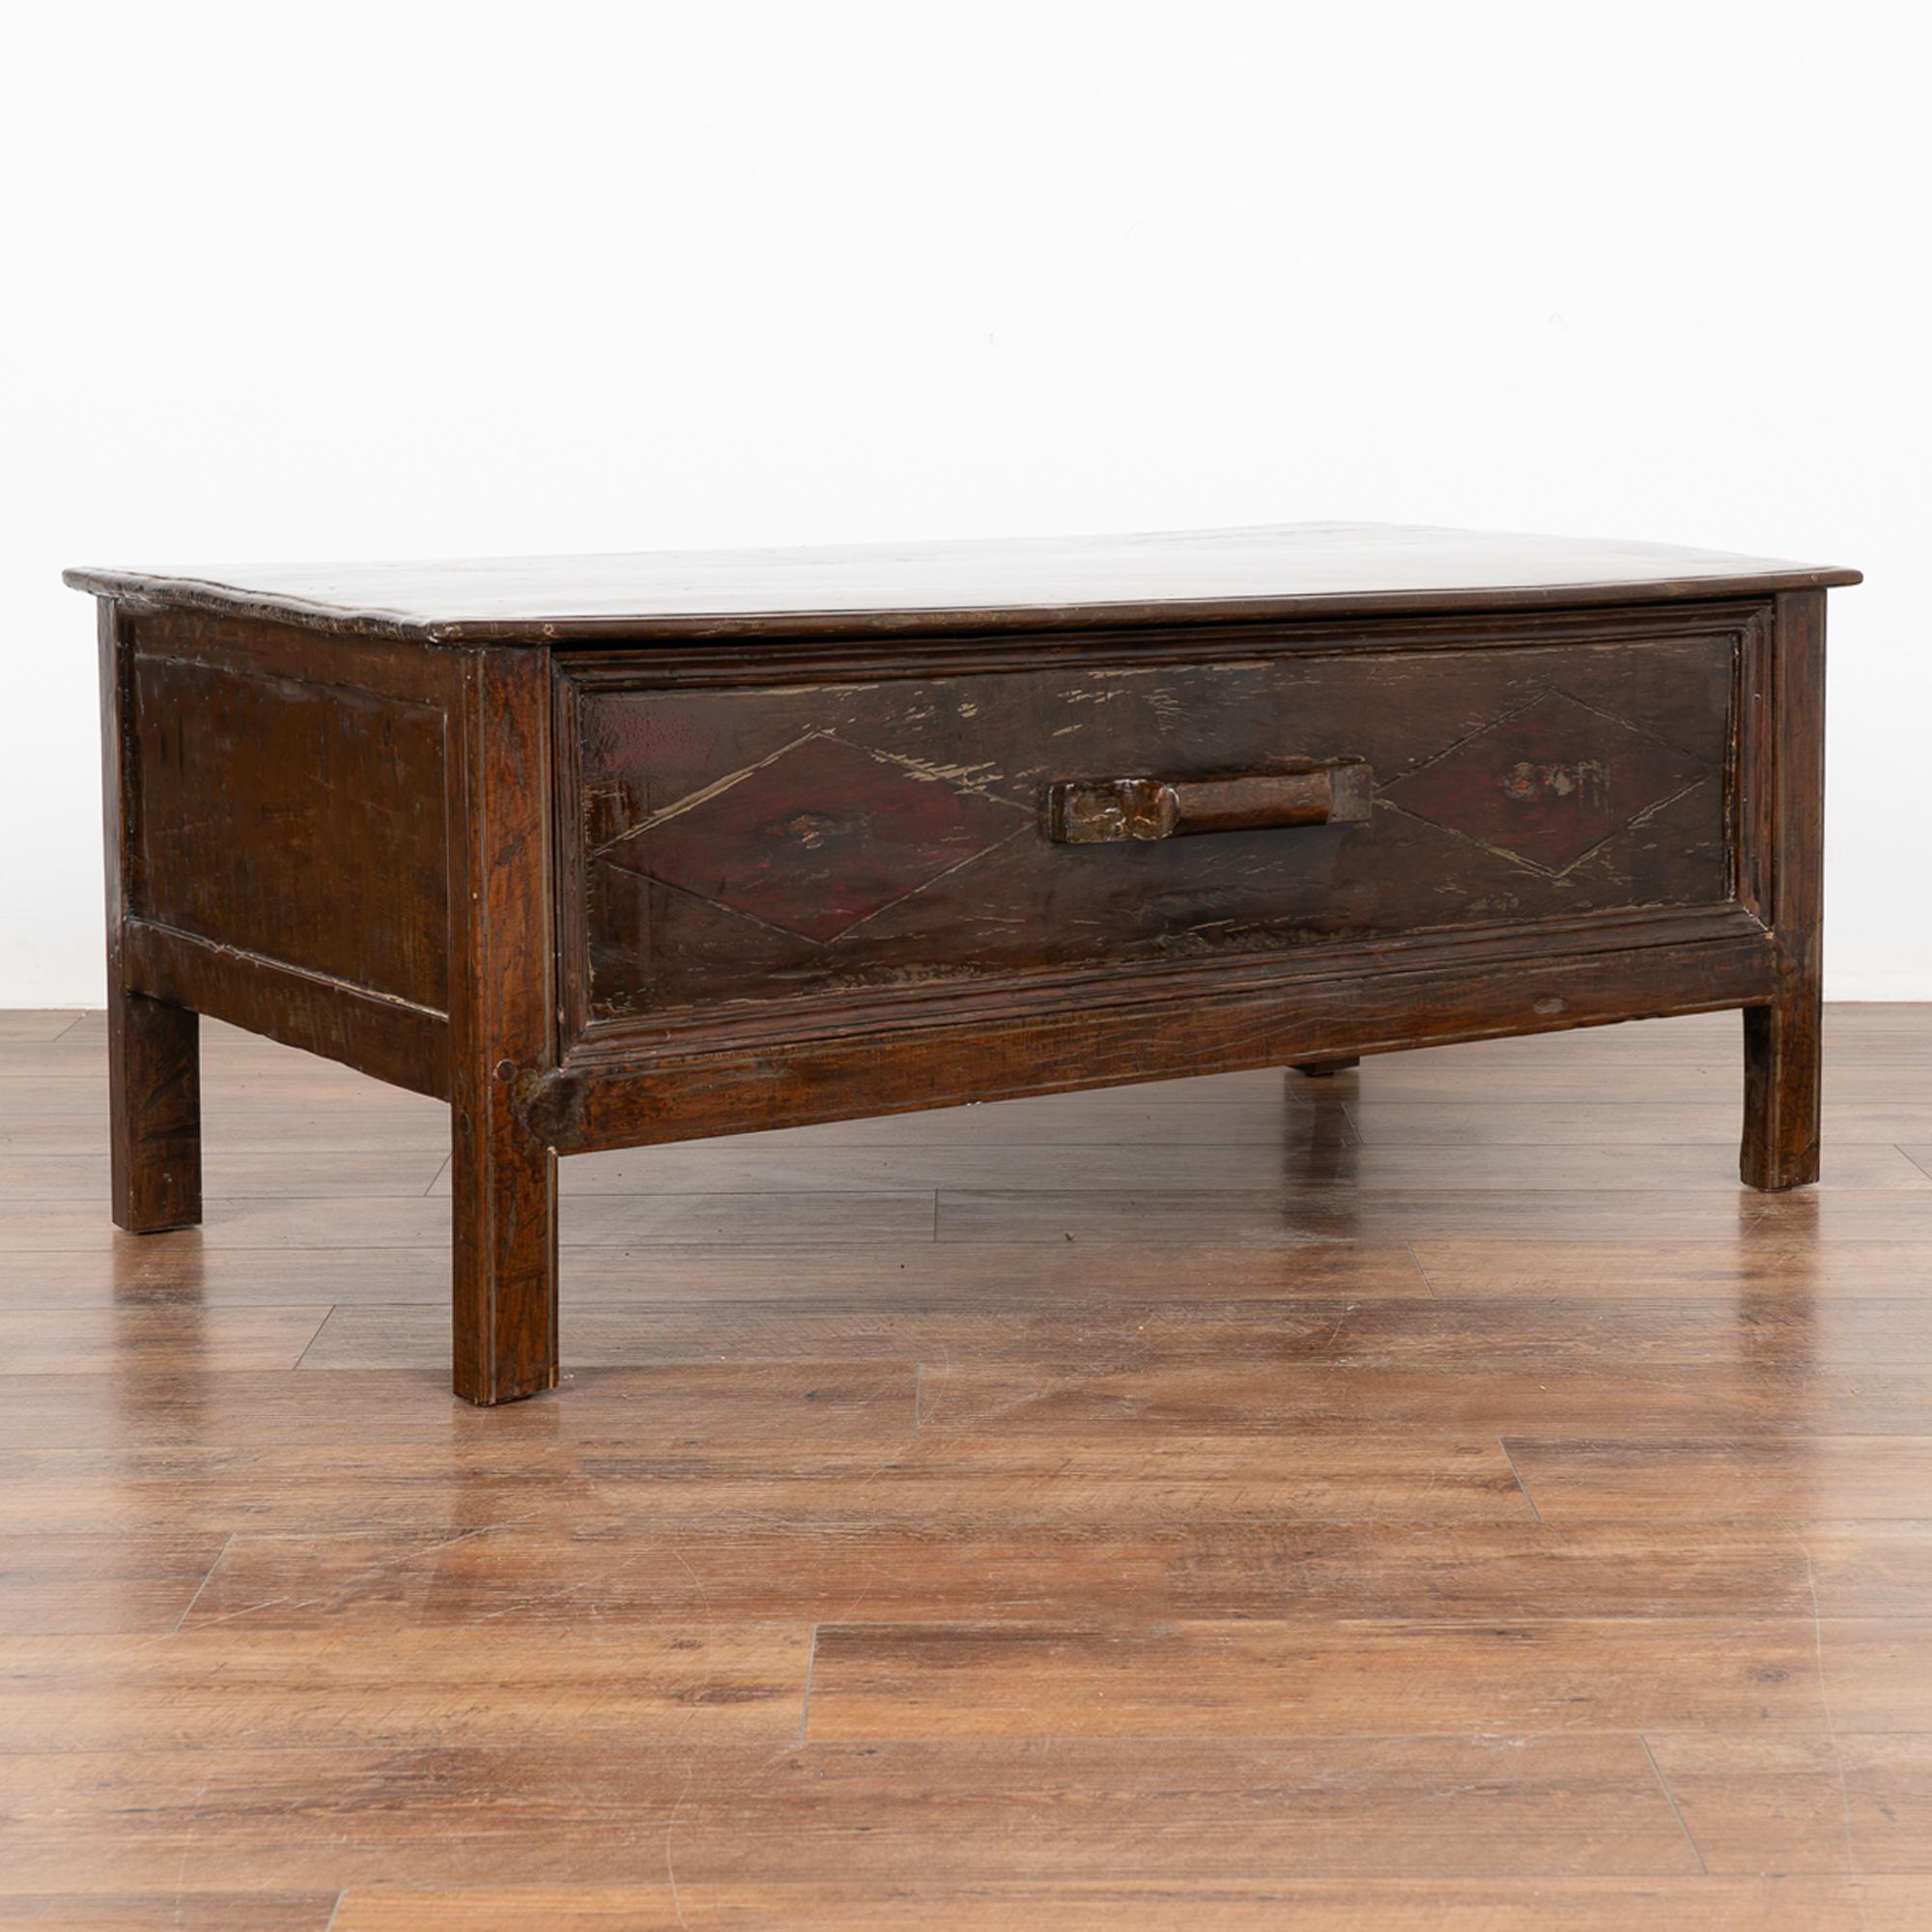 Chinese elmwood lacquered coffee table with single large, deep drawer.
Strong, stable and ready for use. 
Any scratches, cracks, dings, nicks, loss/bubbling to lacquer are reflective of age and do not detract from the beauty nor function of this